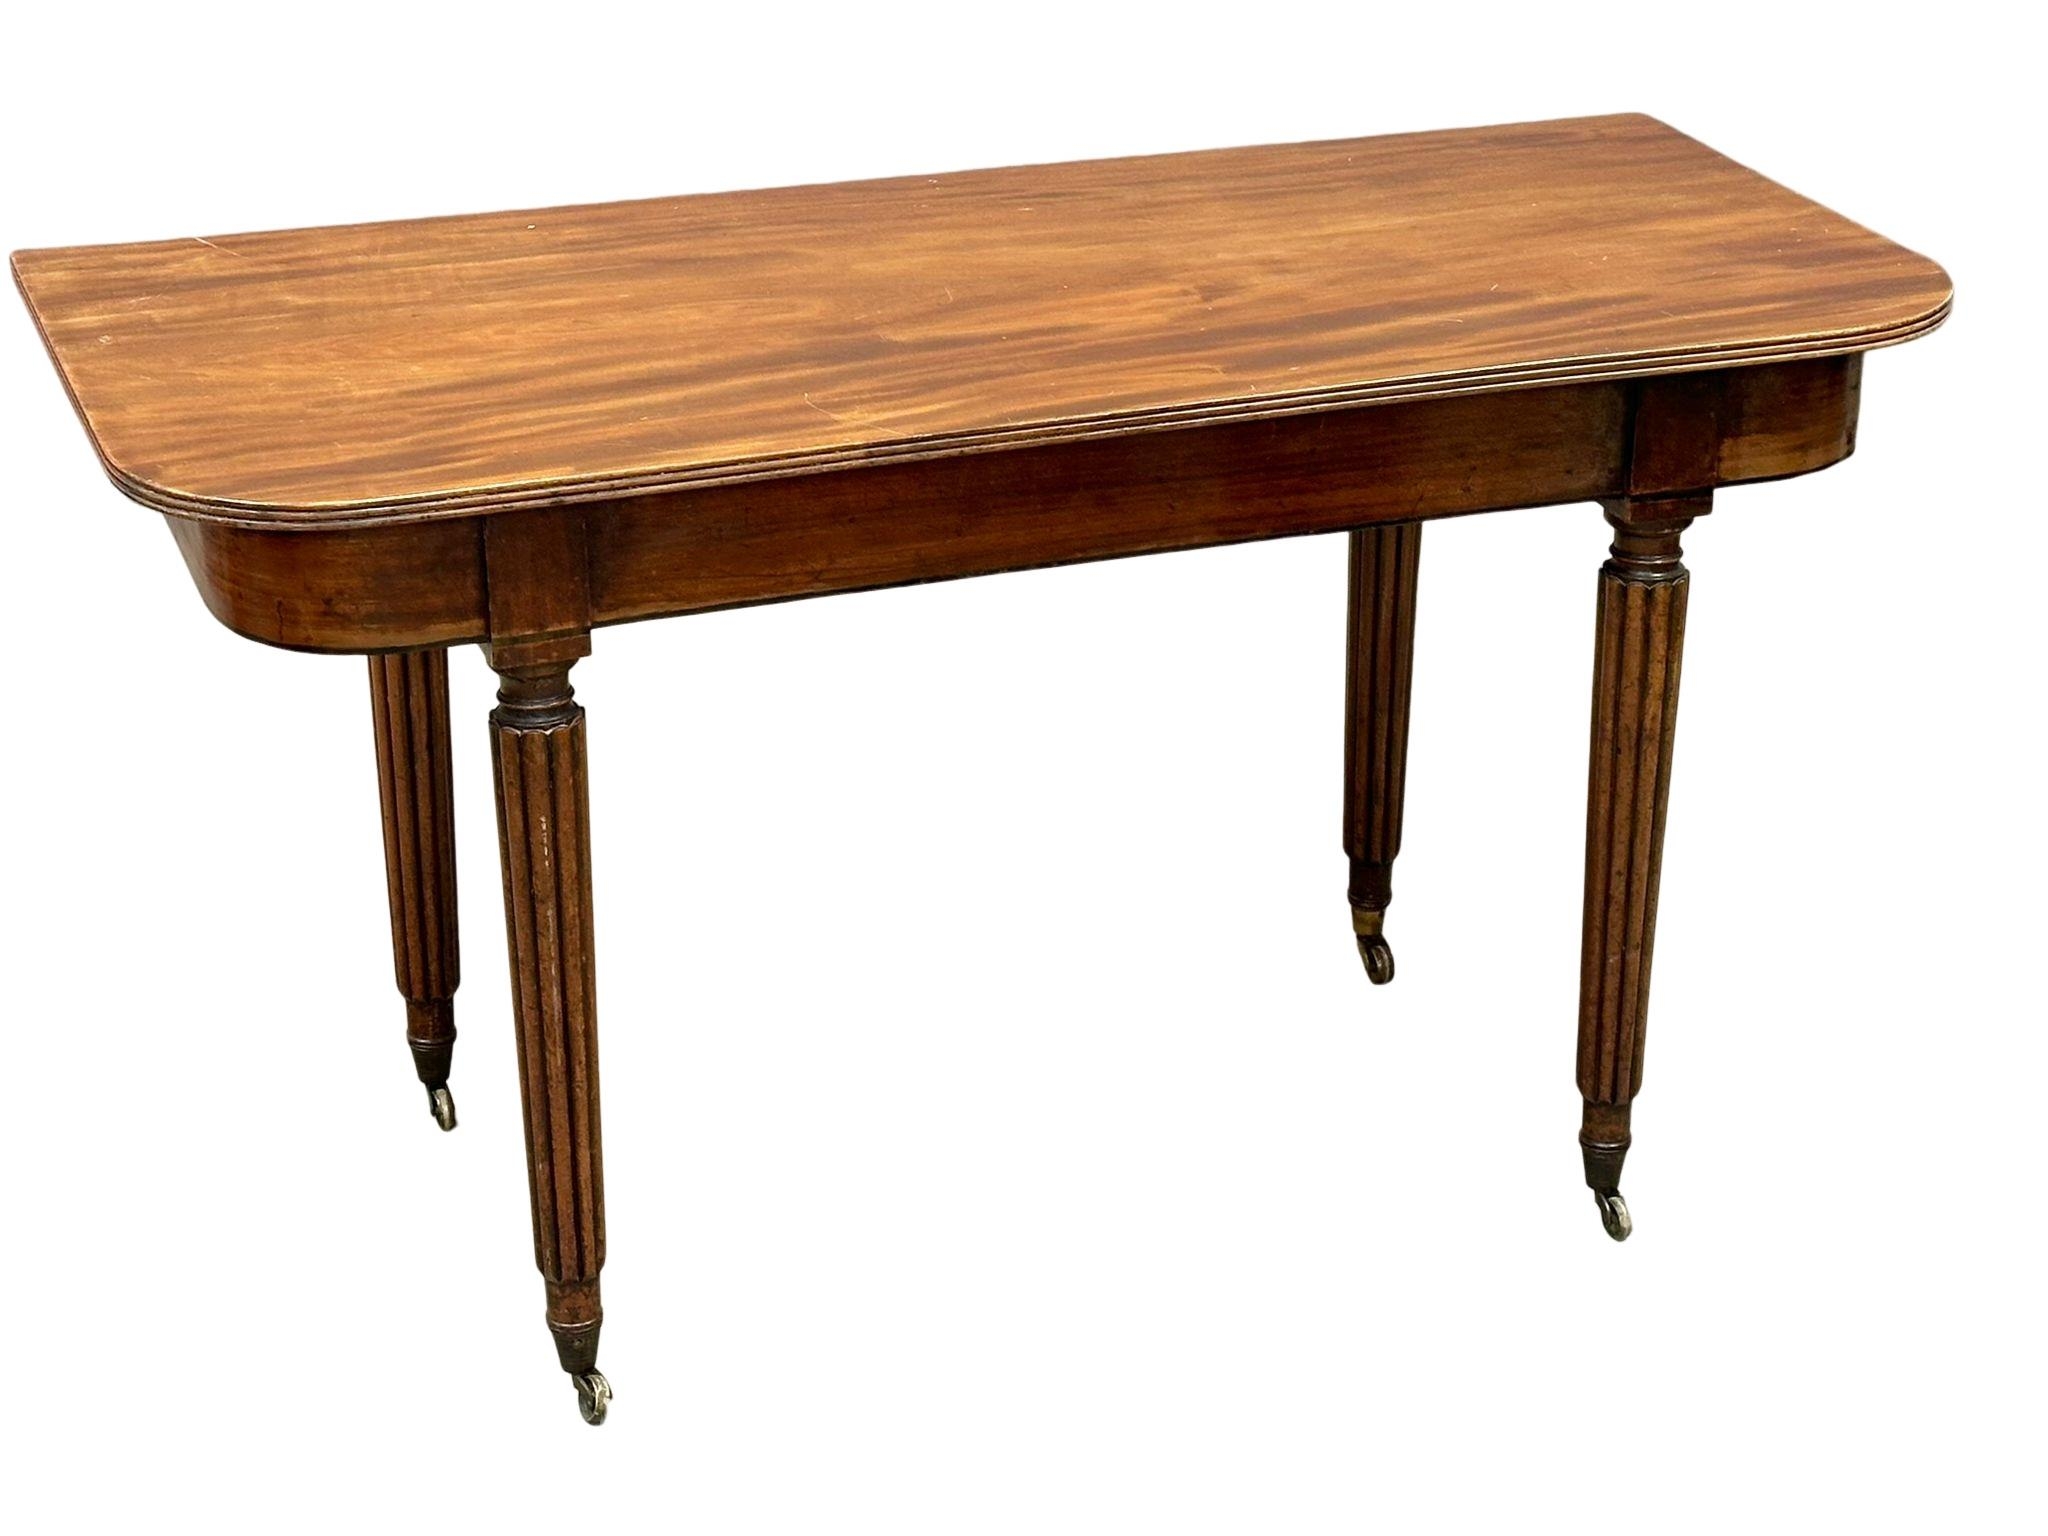 A large George IV mahogany Economy table/dining table with some later alterations. Circa 1820. 307. - Image 10 of 15